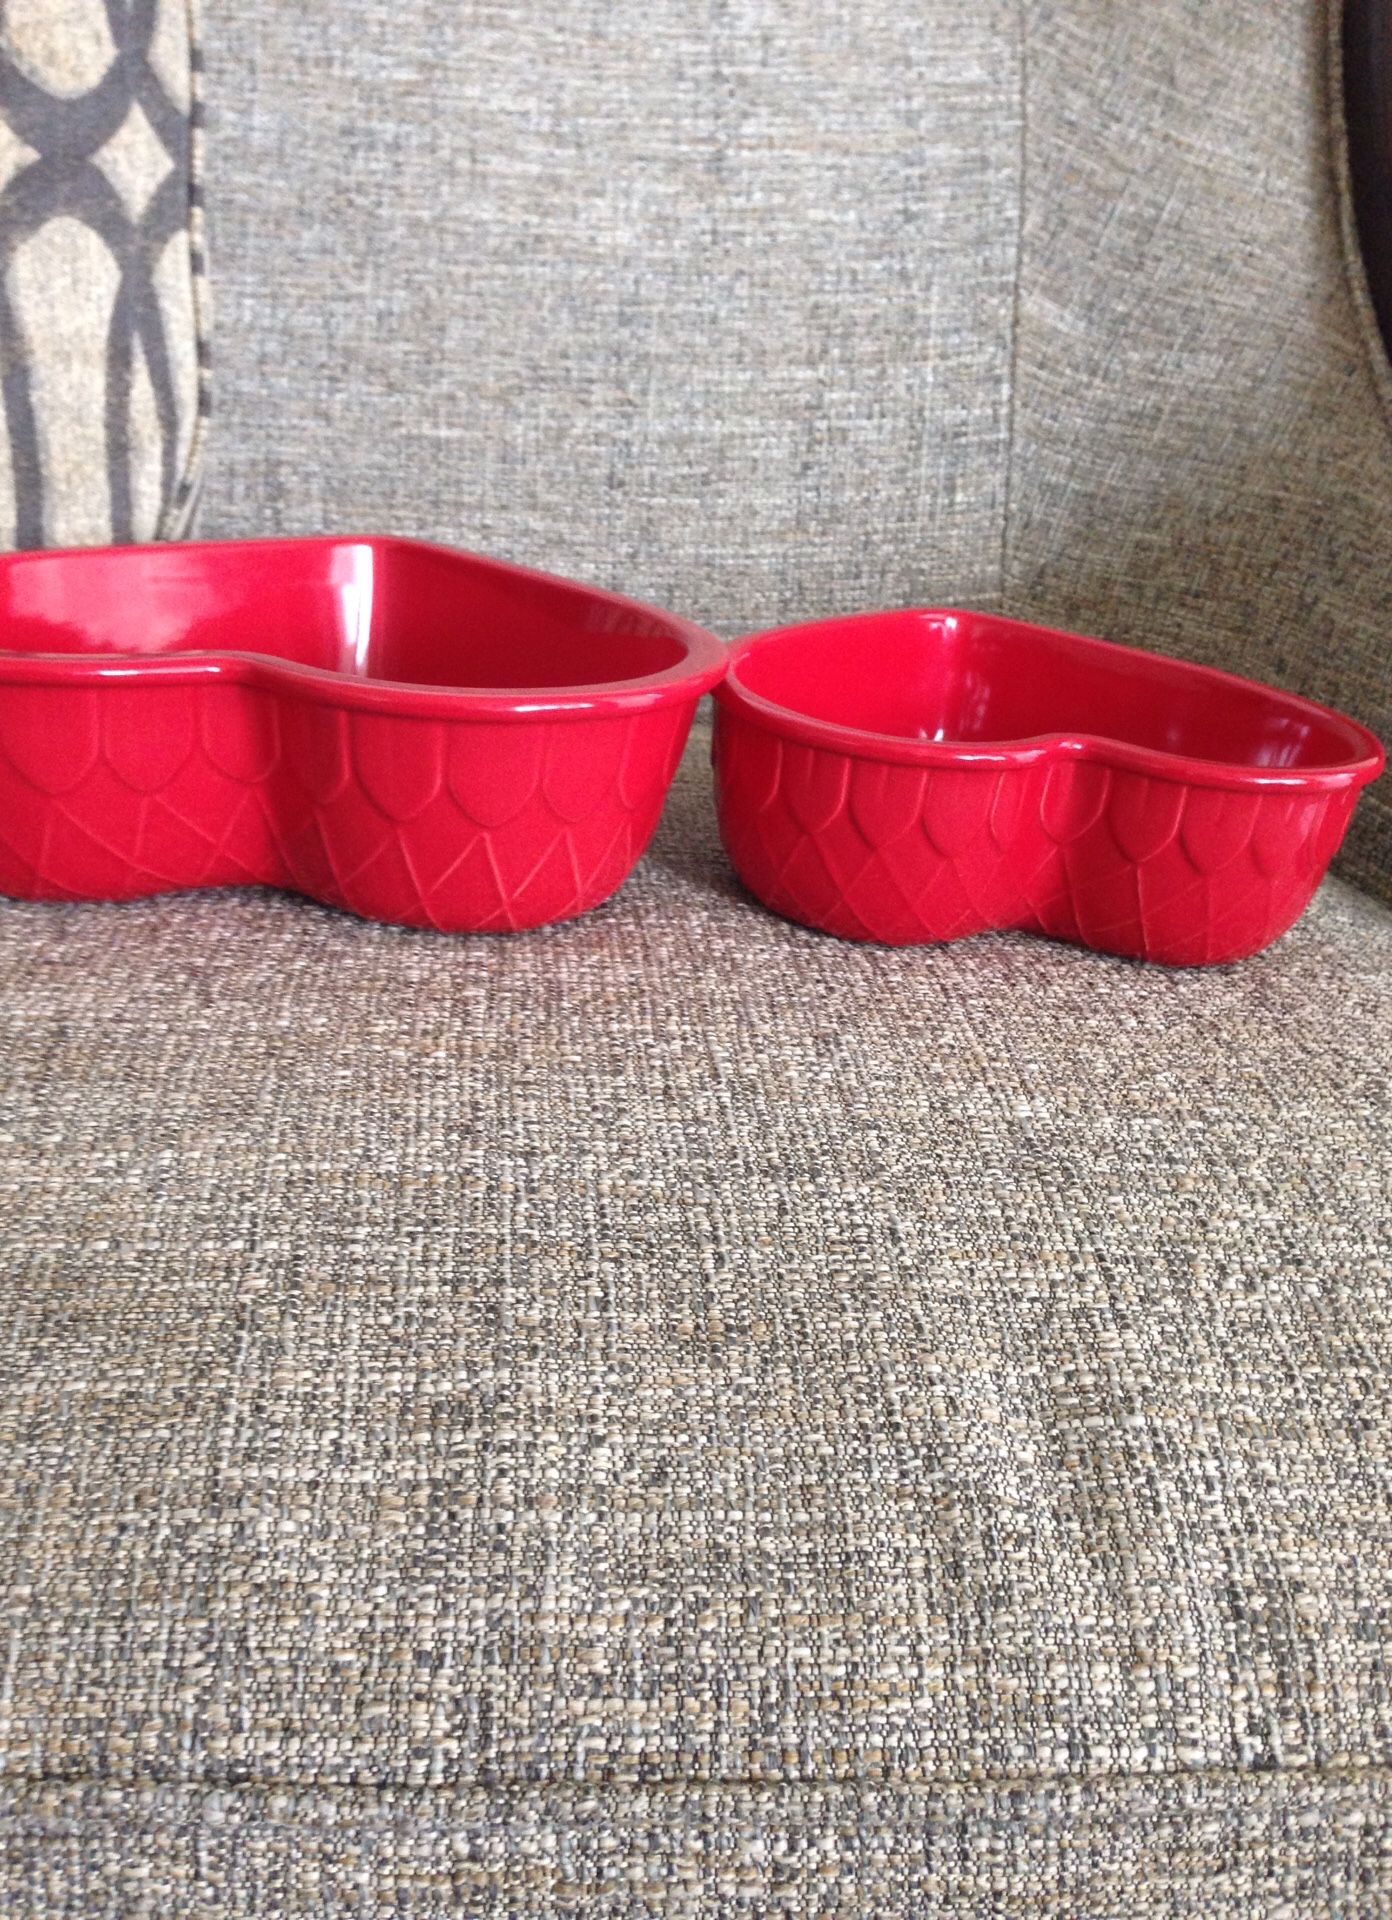 2 PCS of Ceramic Bake ware. Please See All The Pictures and Read the description